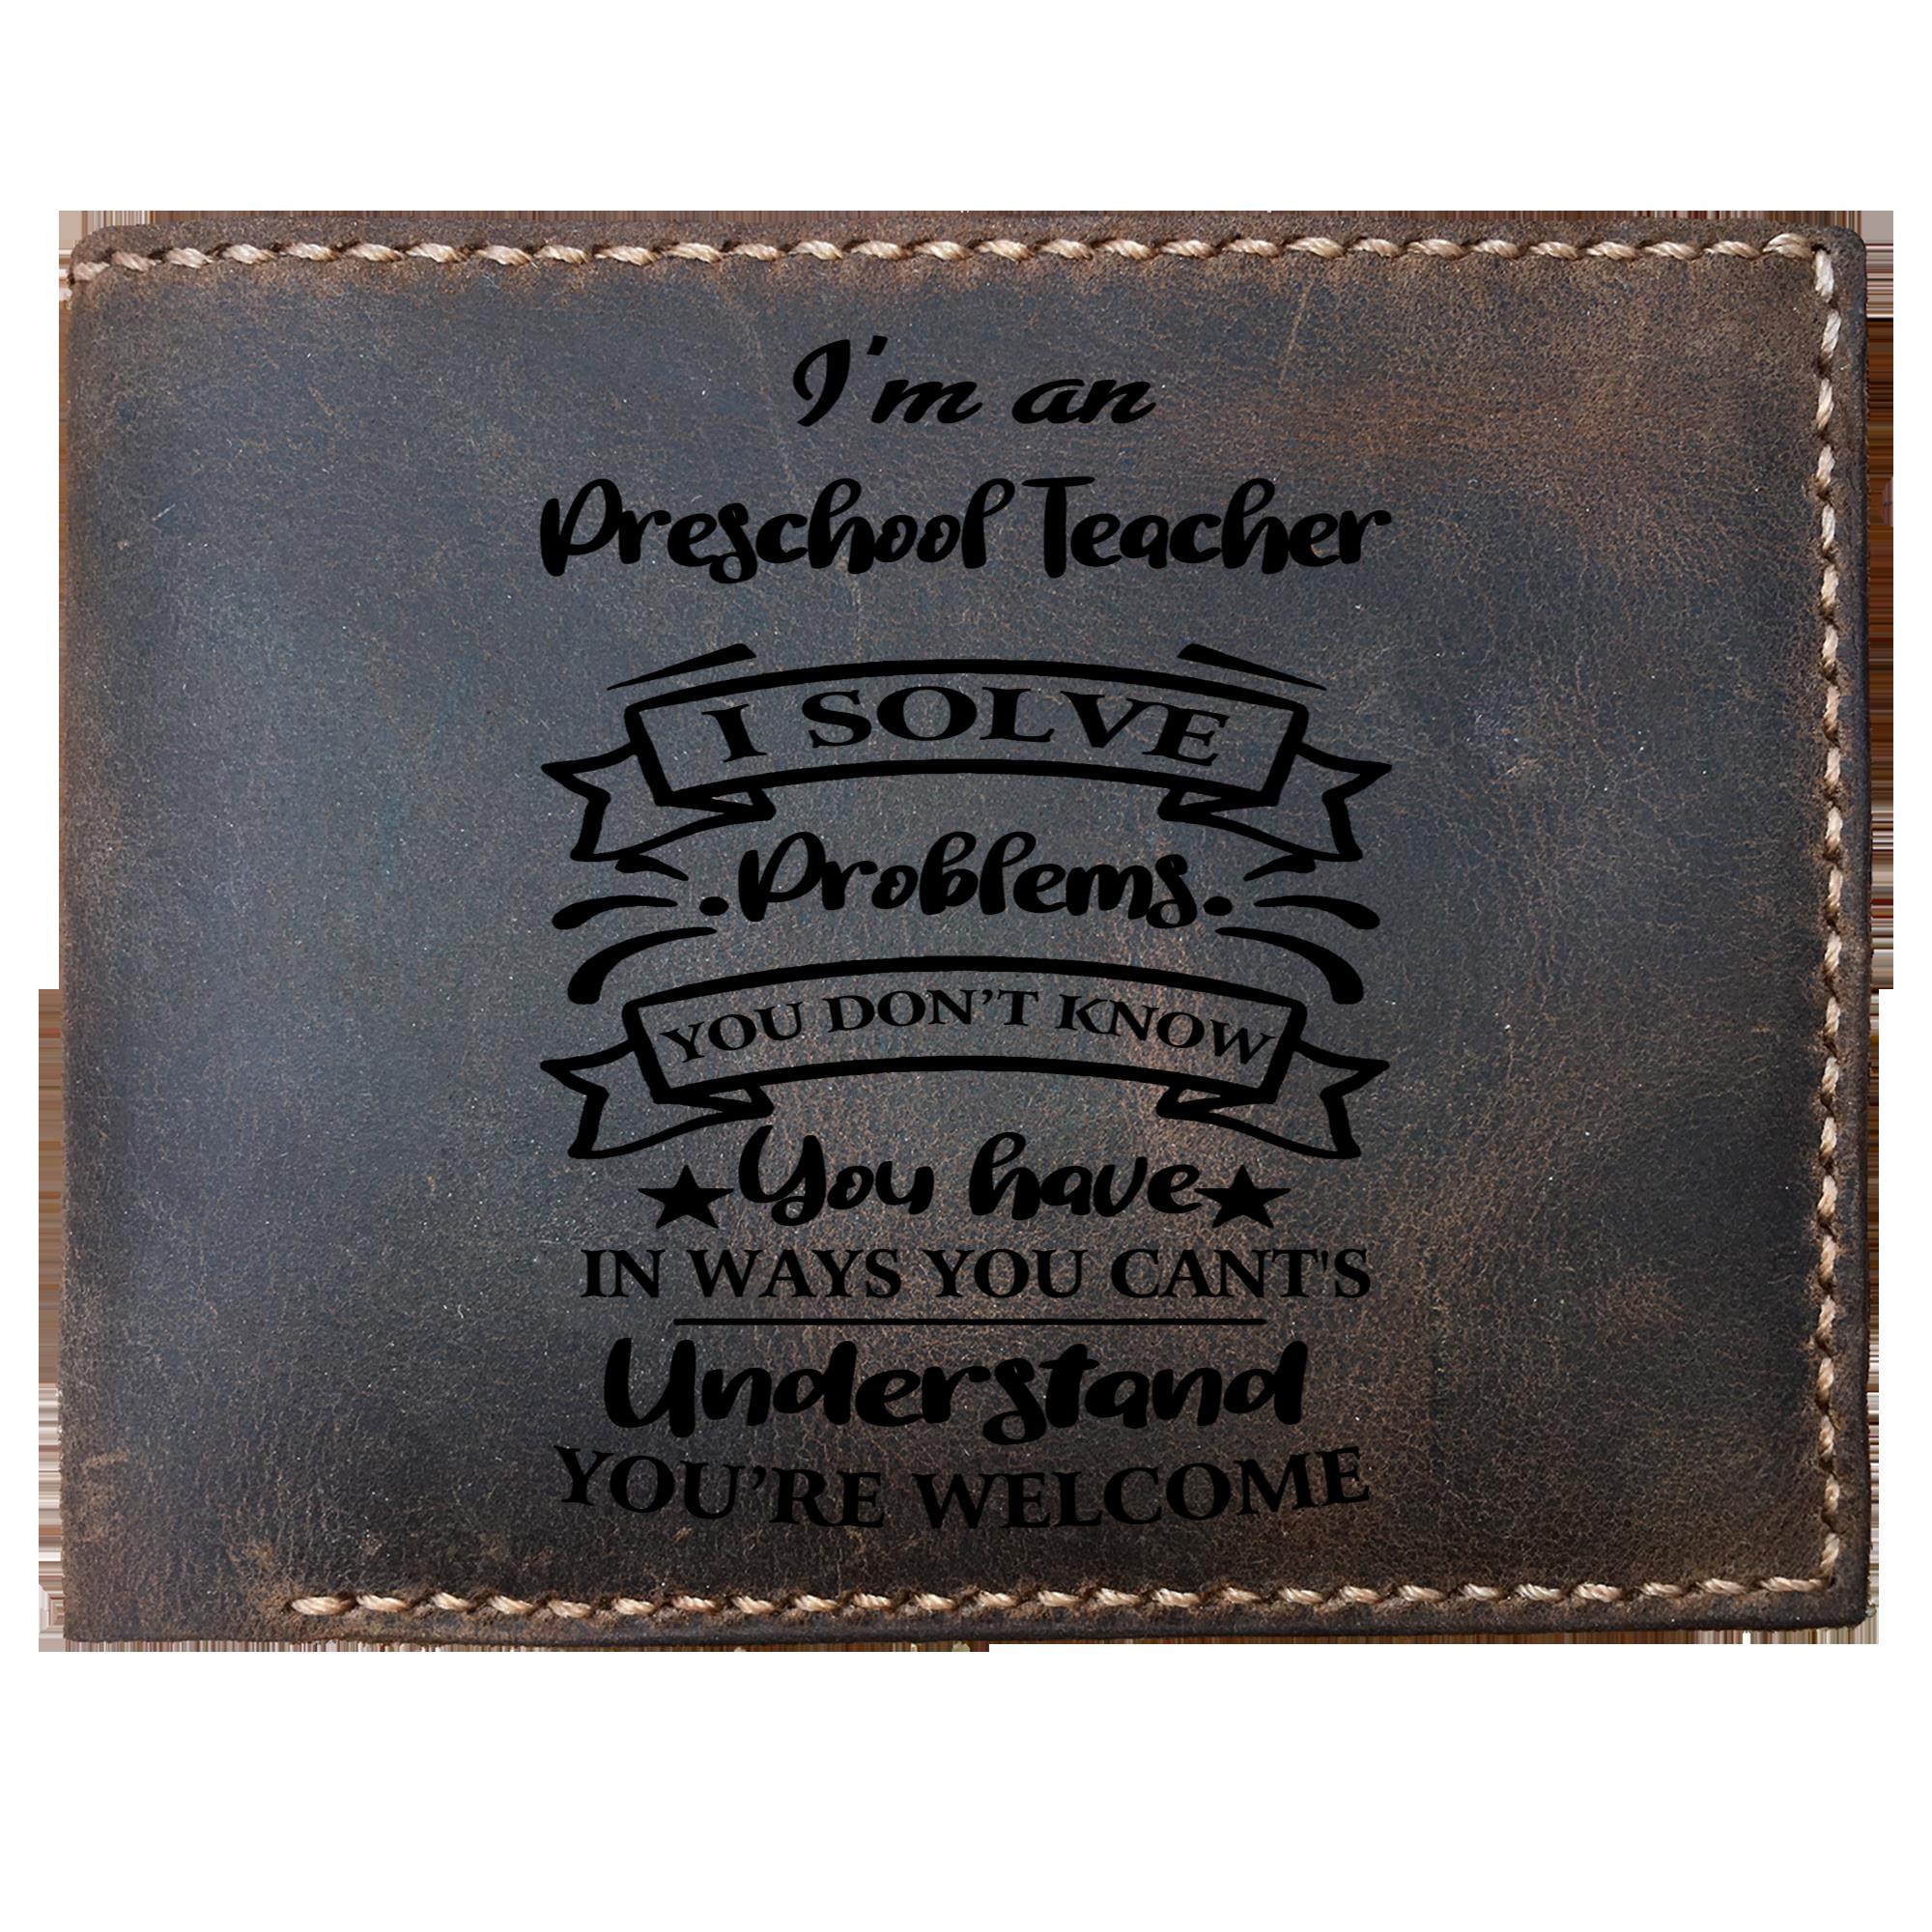 Skitongifts Funny Custom Laser Engraved Bifold Leather Wallet For Men, I'm an Preschool Teacher Solve Problems, Father's Day Gifts